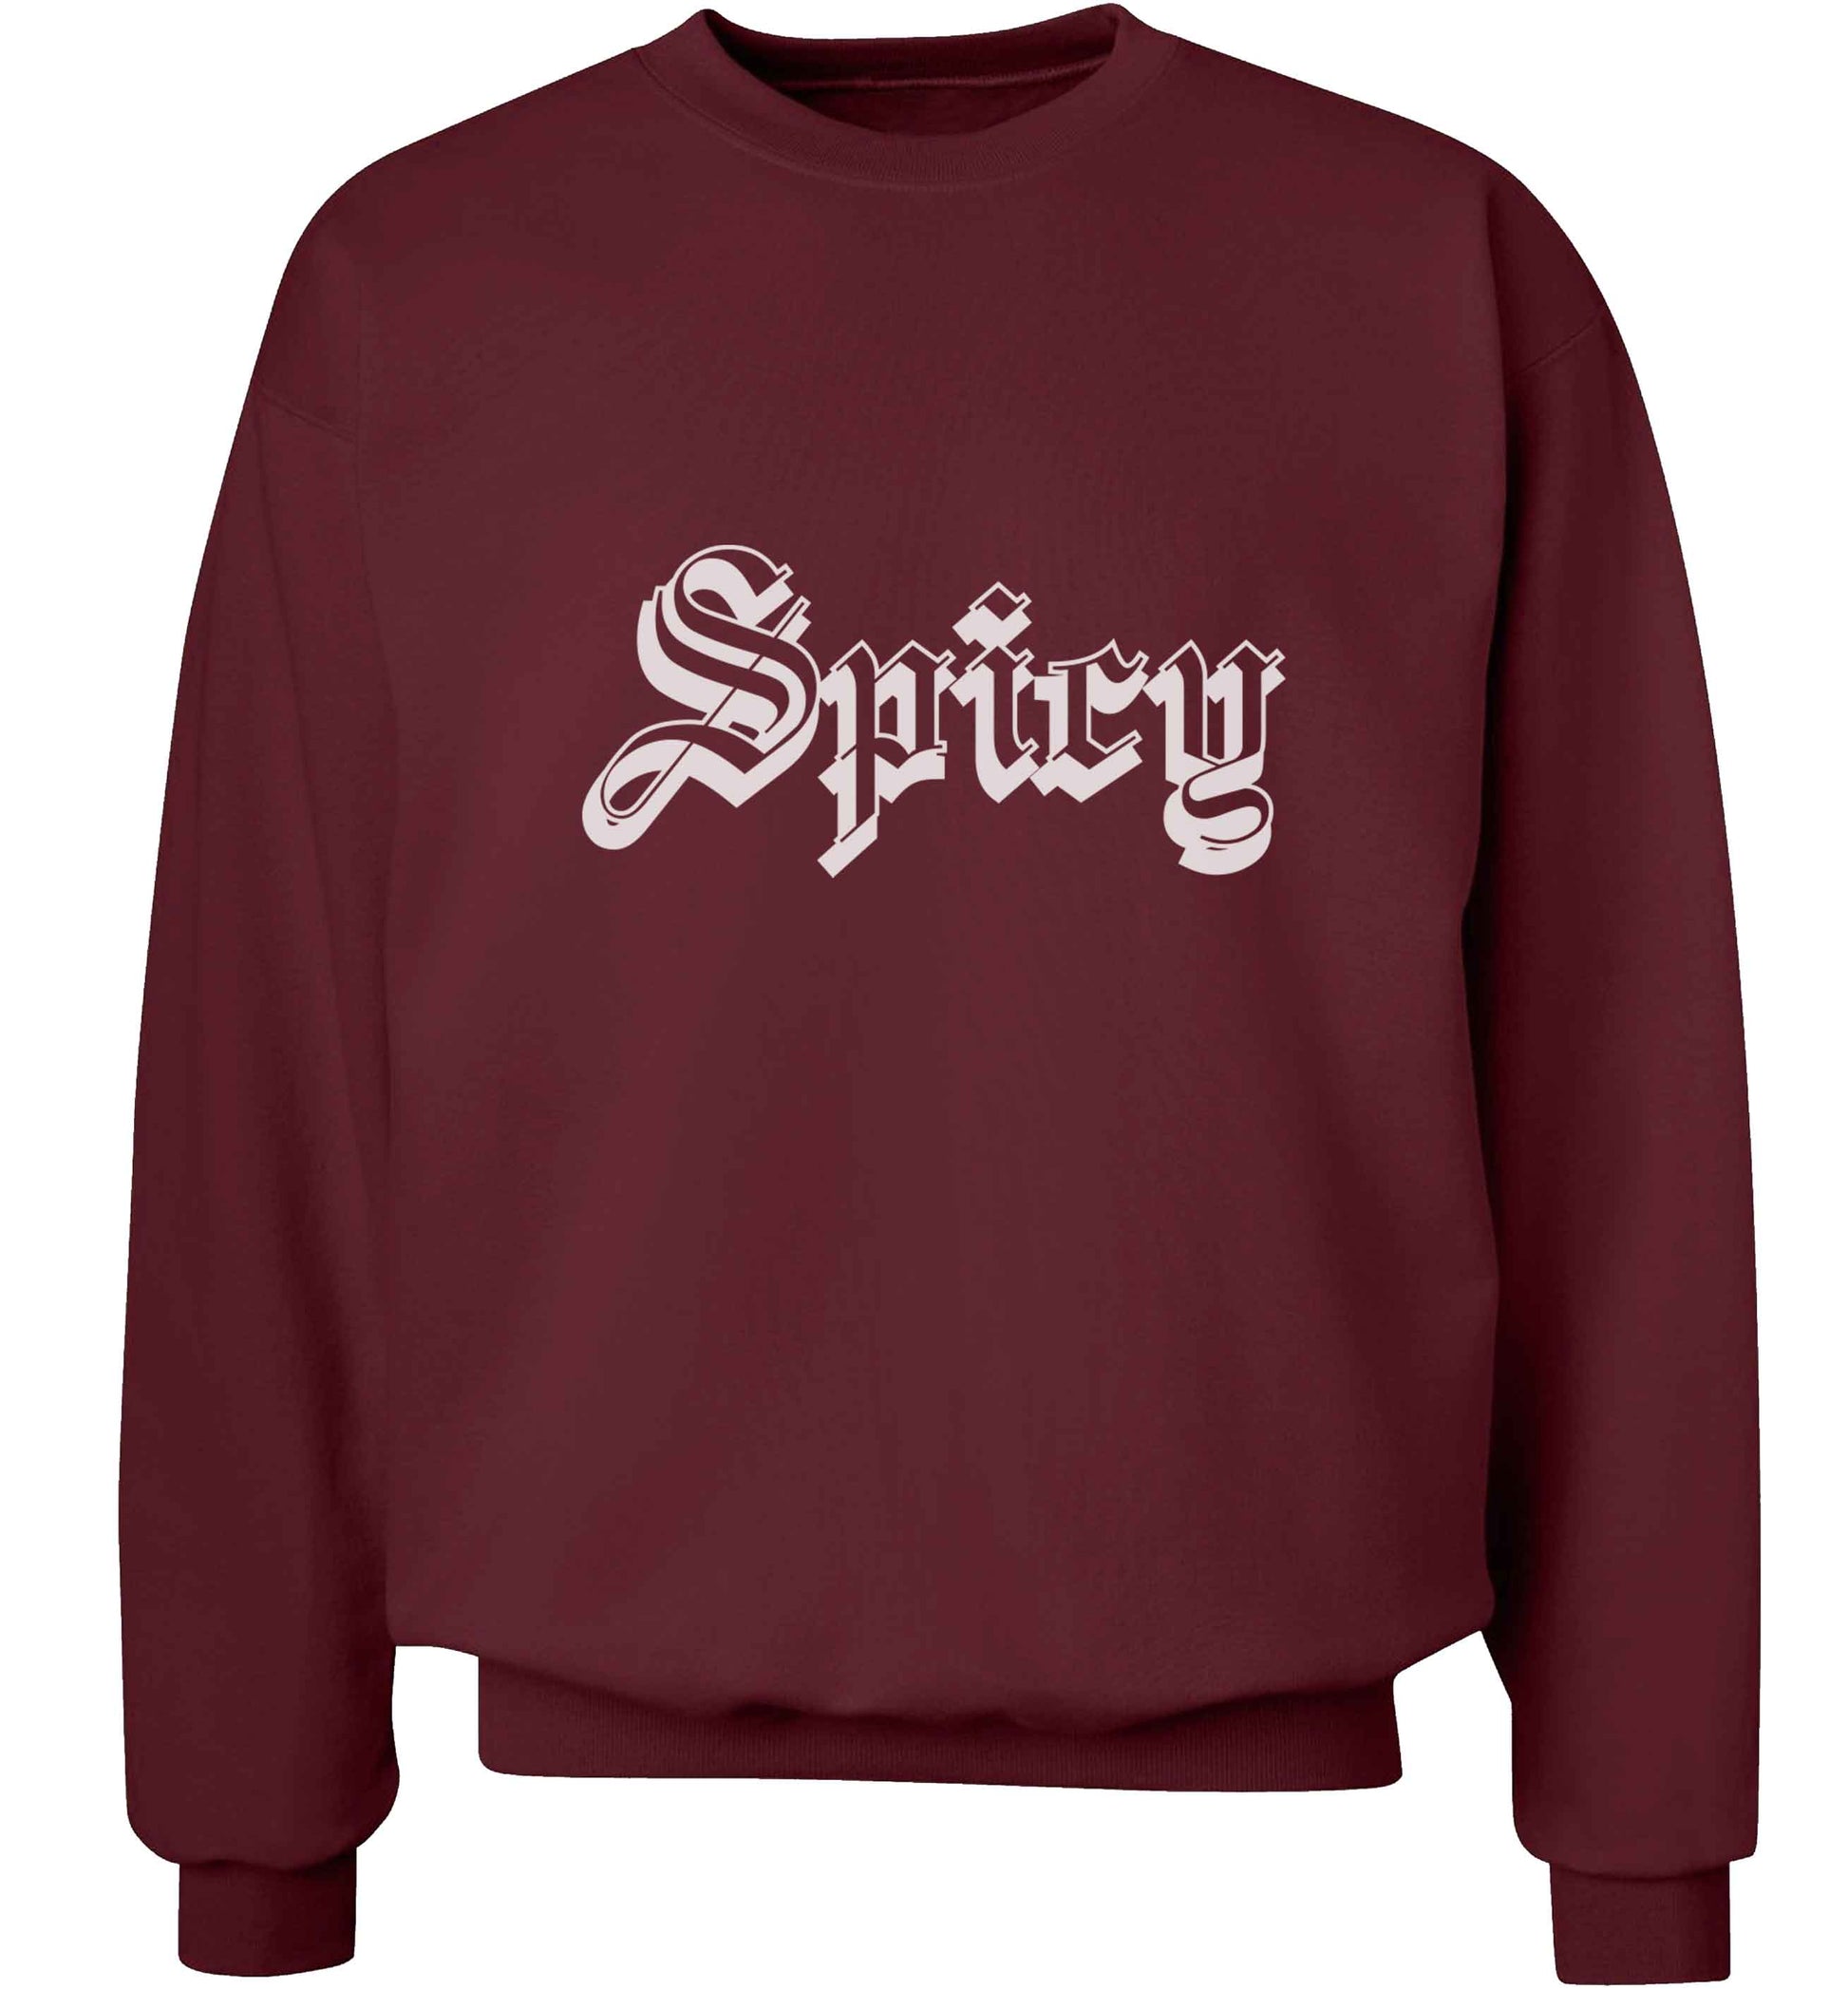 Spicy adult's unisex maroon sweater 2XL